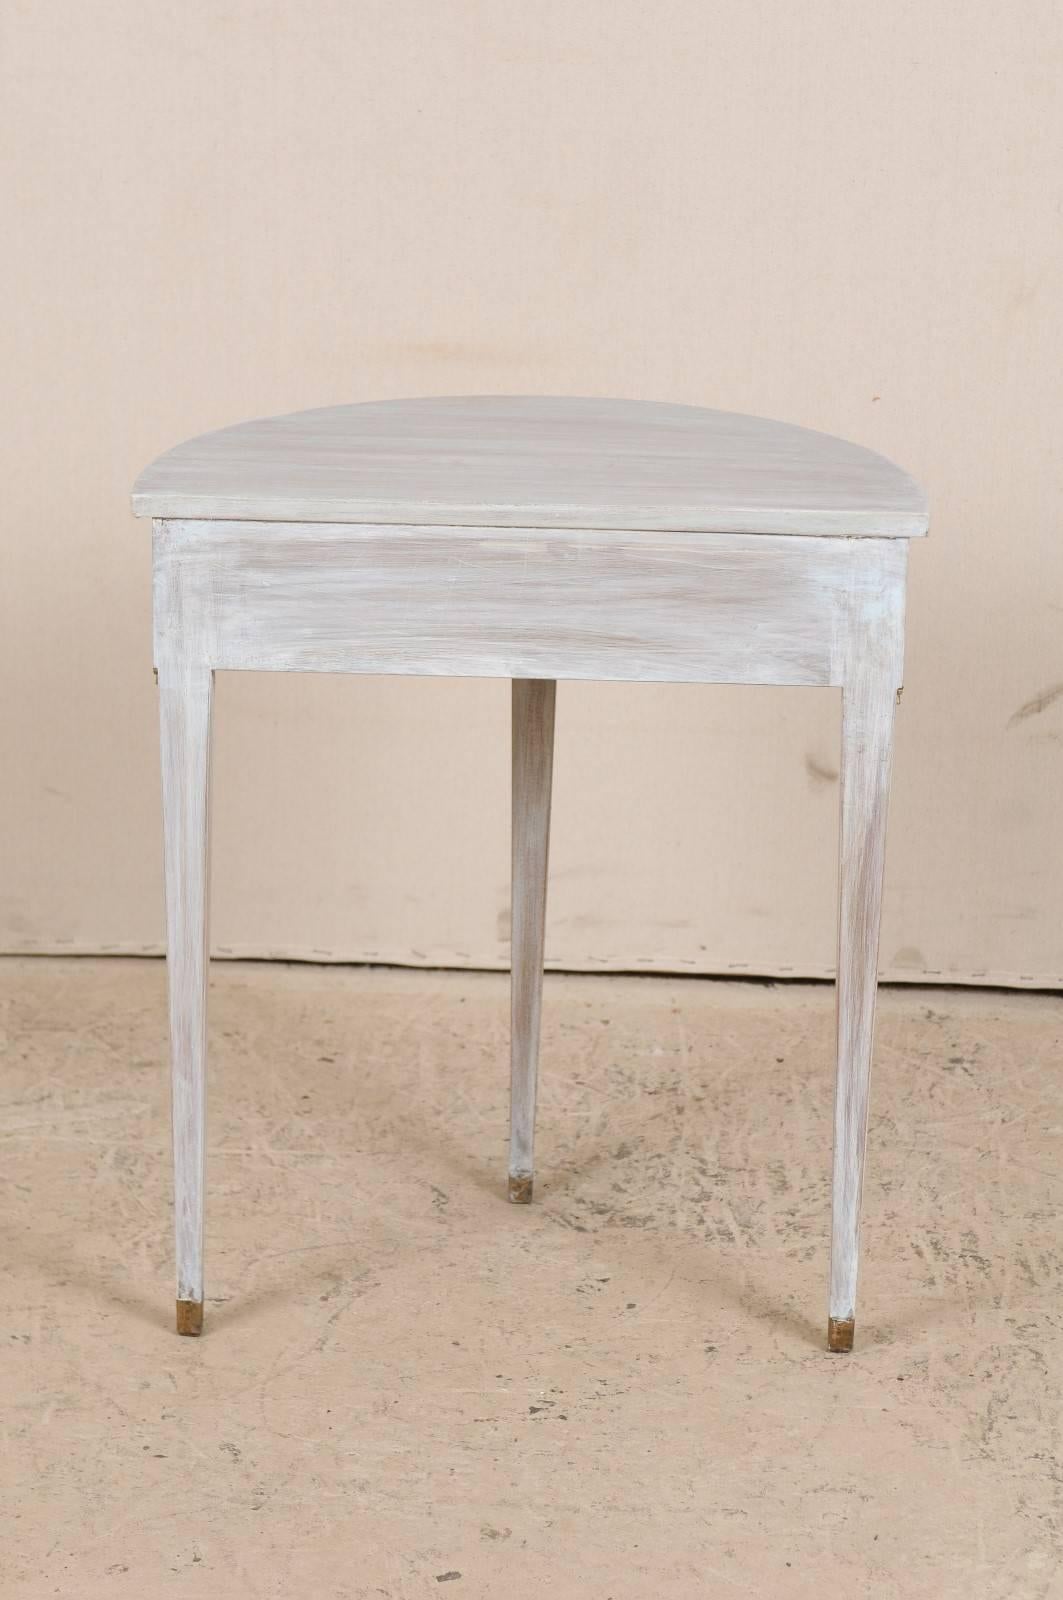 Wood Swedish Pale Blue Painted Demilune Table with Two Drawers & Three Tapered Legs